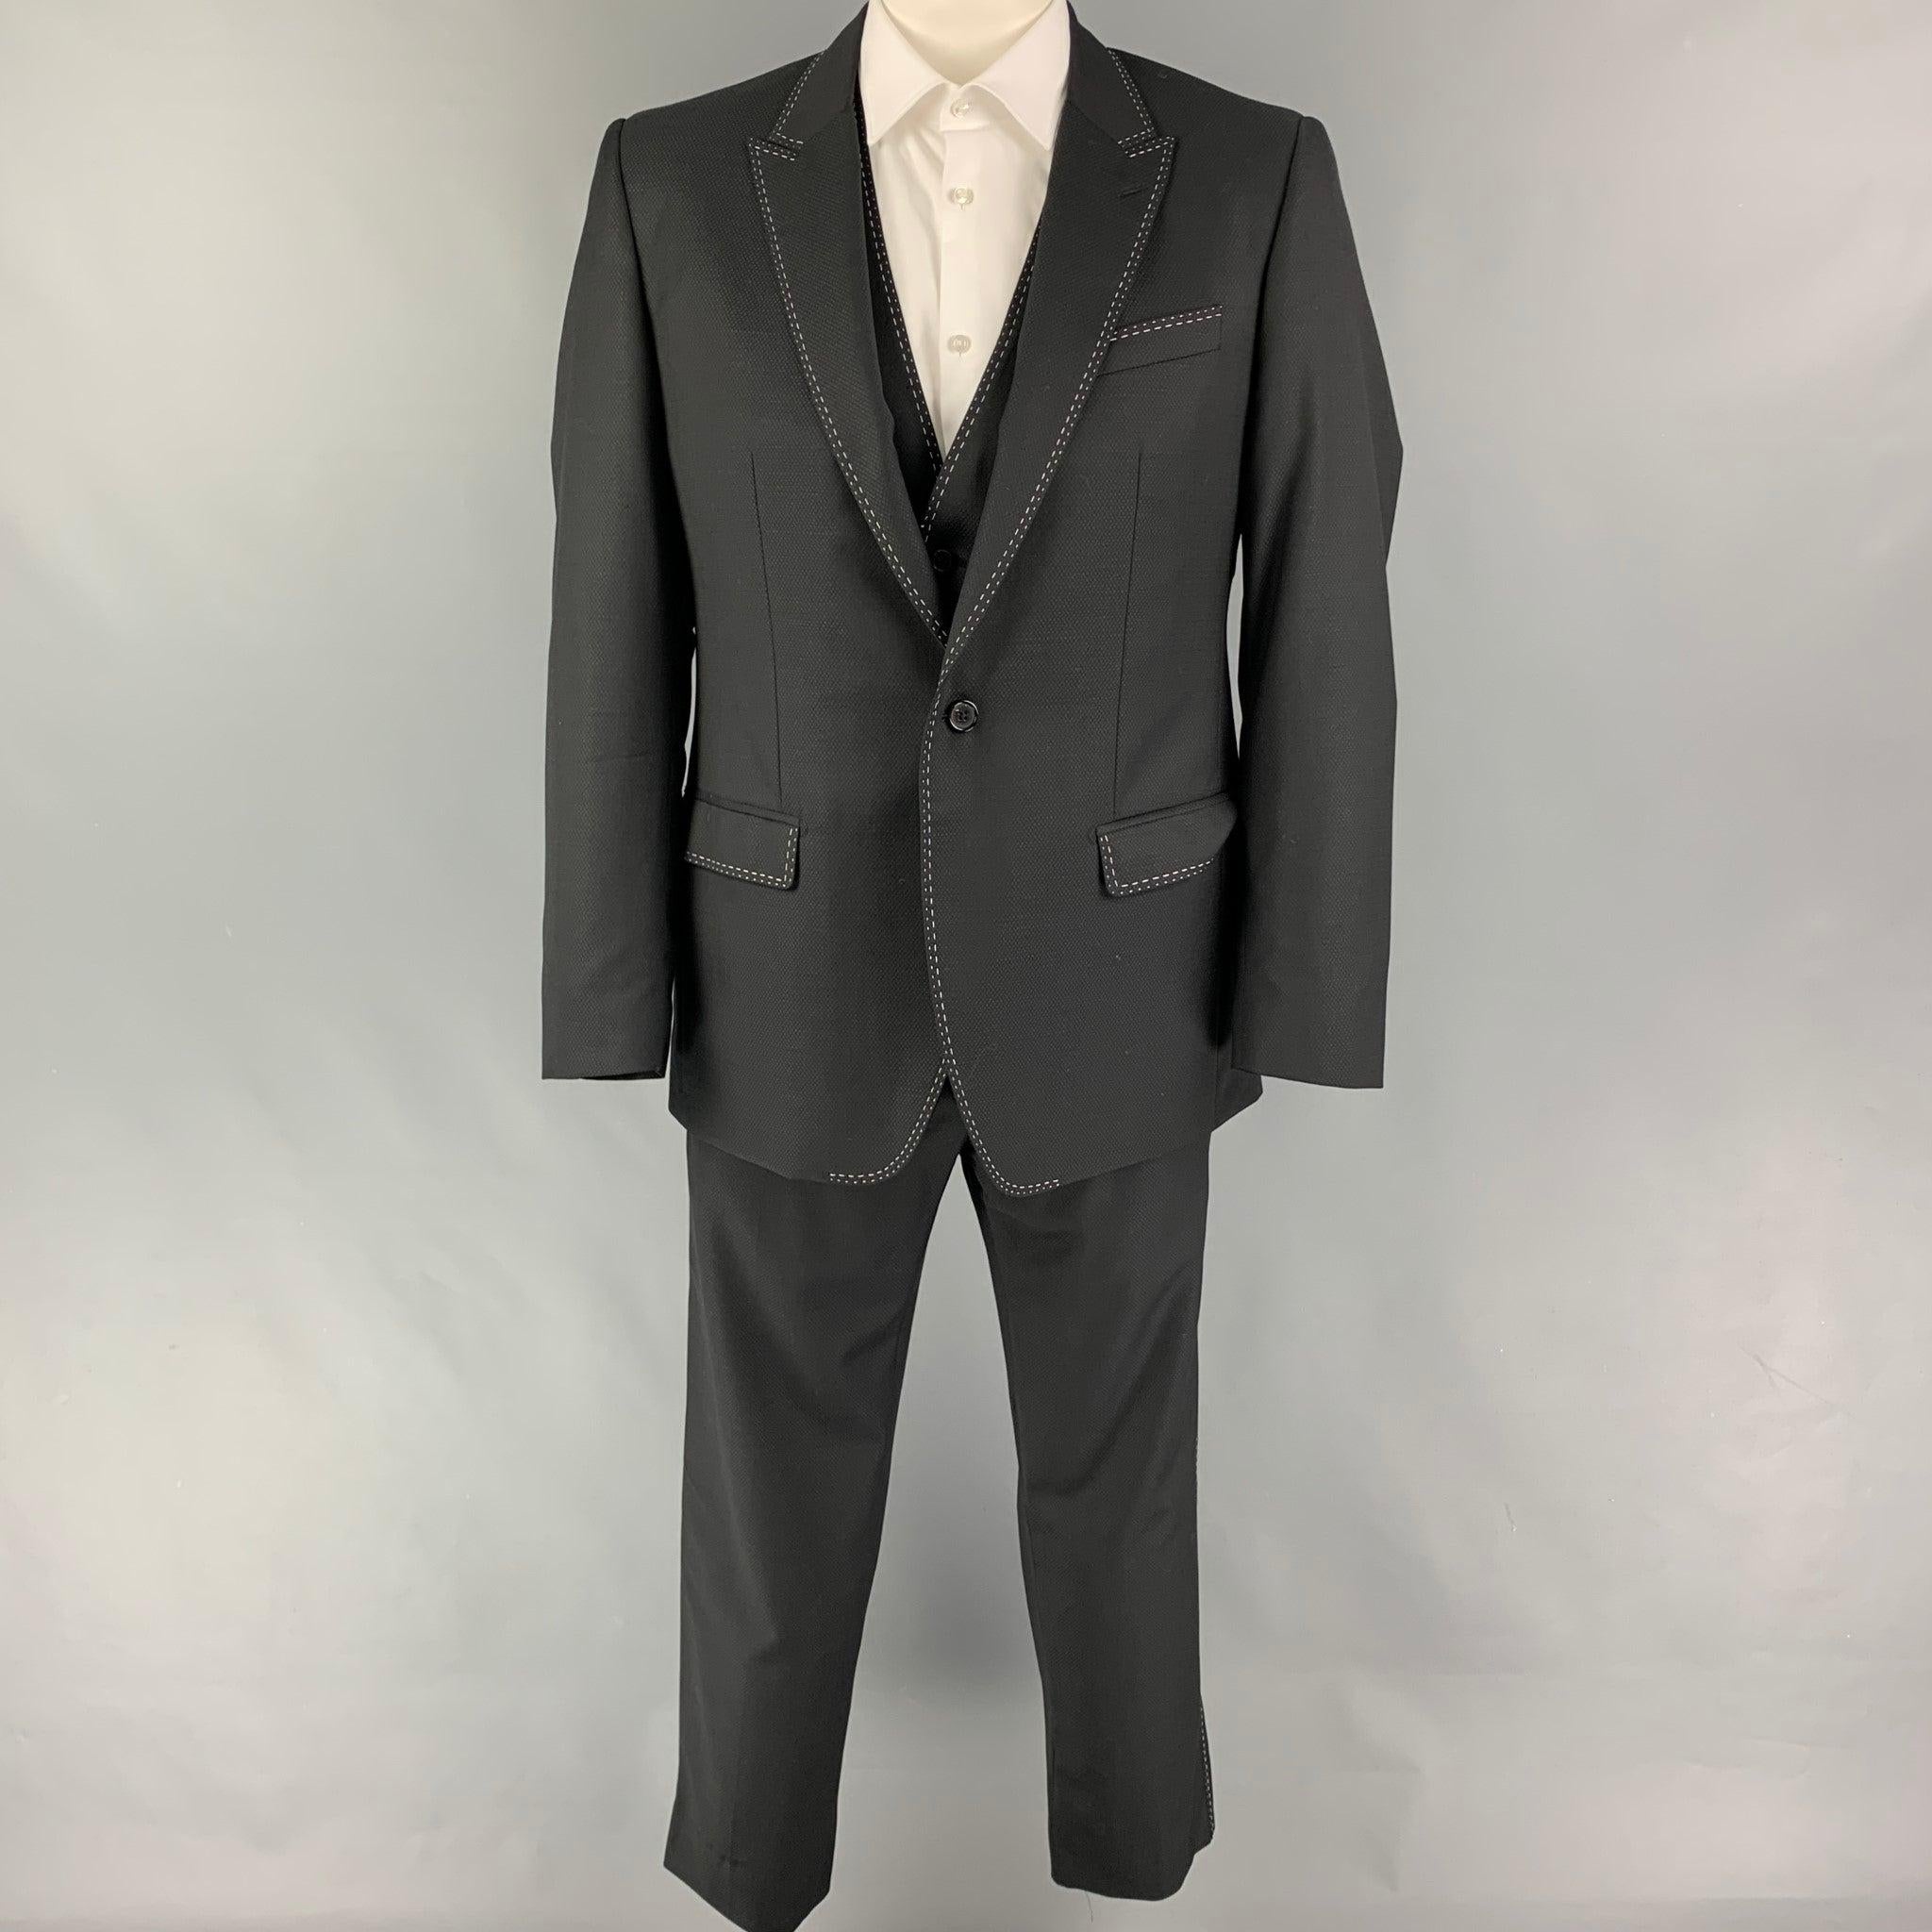 DOLCE & GABBANA 3 Piece suit comes in a black wool with a full liner and includes a single breasted, single button sport coat with a peak lapel and a matching vest & flat front trousers. Made in Italy. Excellent Pre-Owned Condition. 

Marked:   52